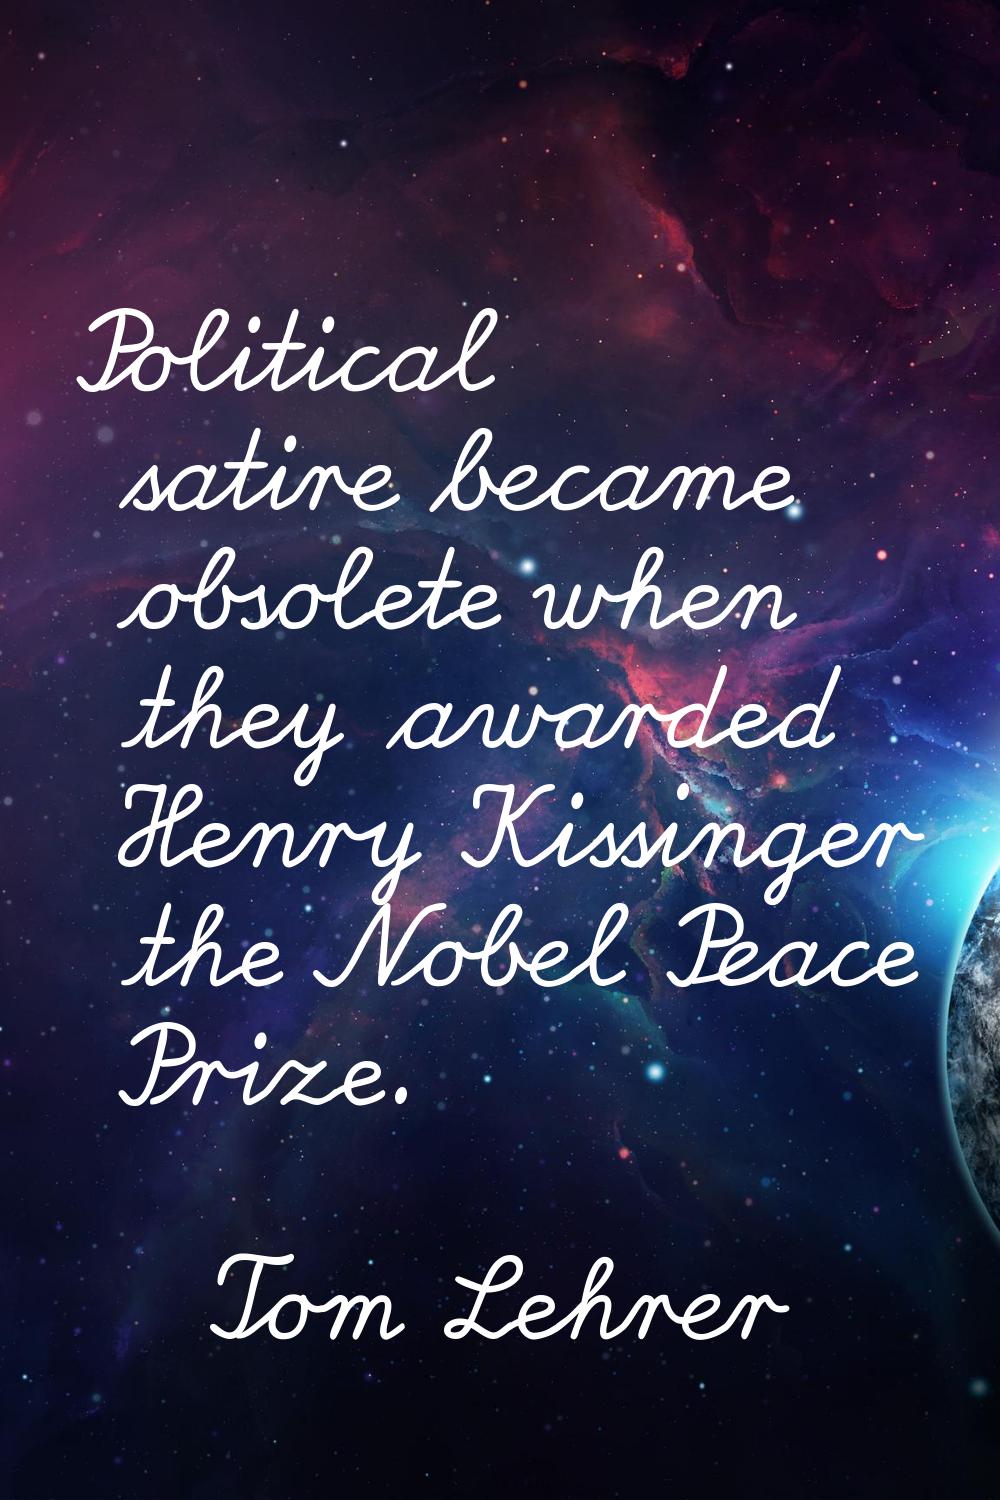 Political satire became obsolete when they awarded Henry Kissinger the Nobel Peace Prize.